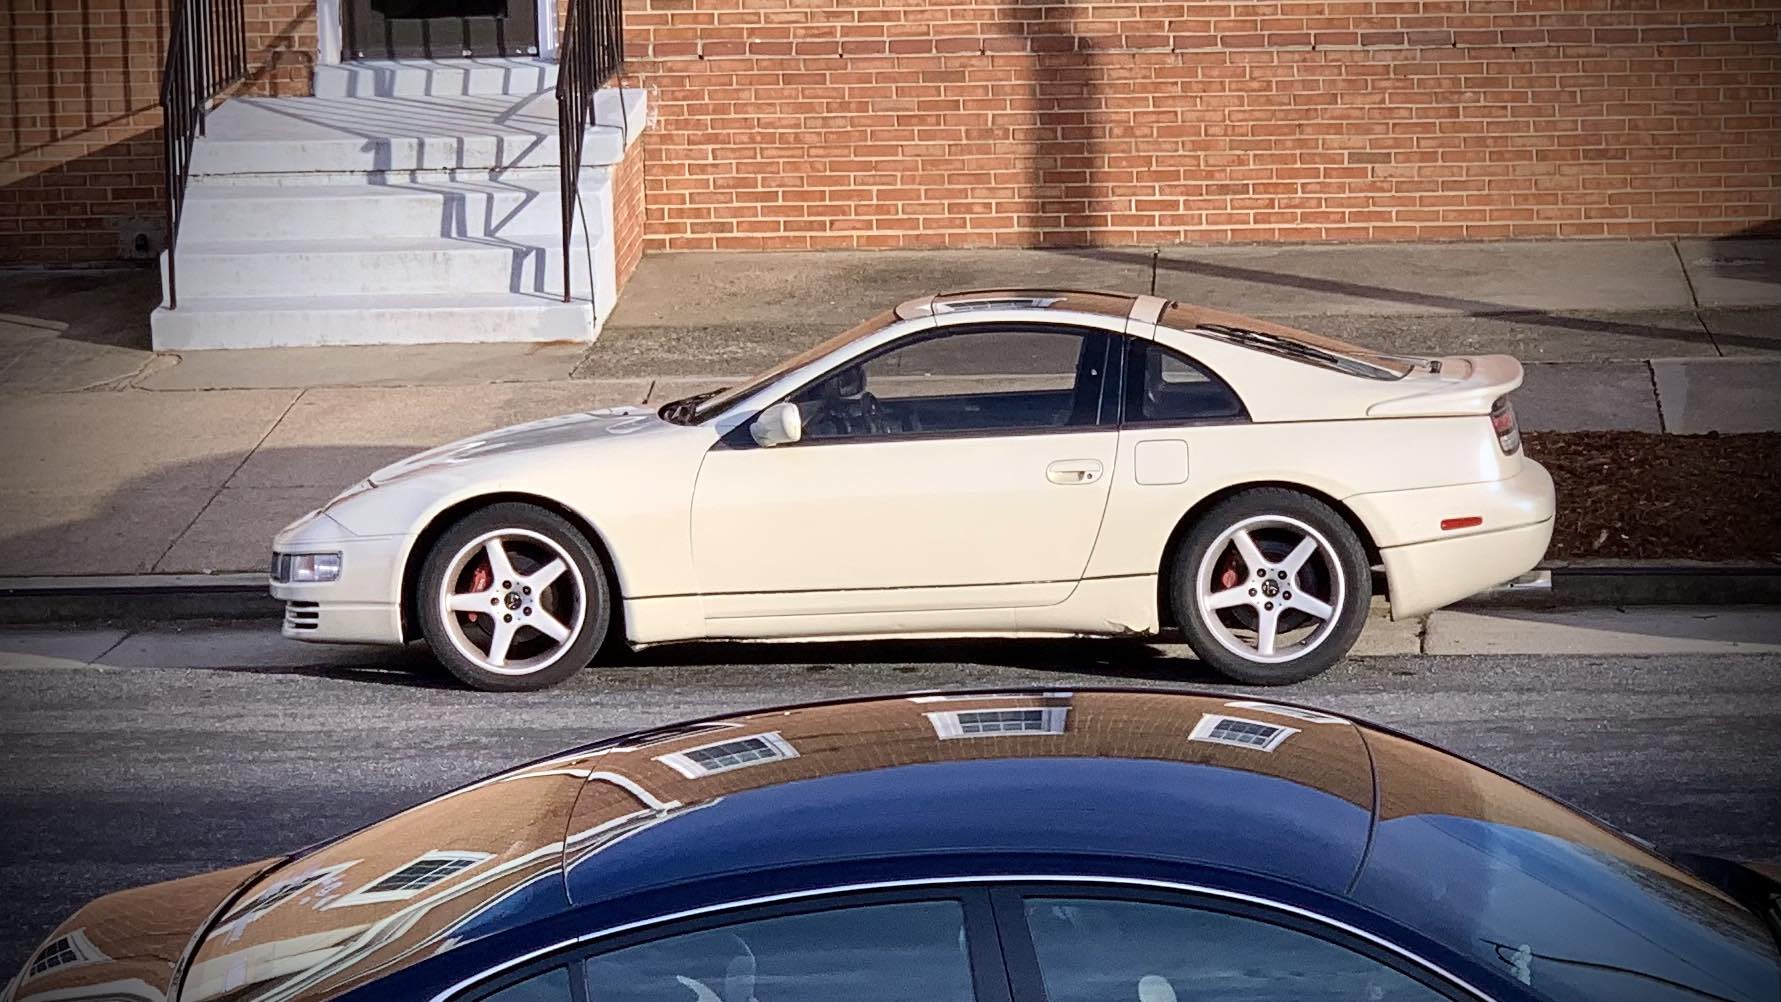 Chris's 300ZX out on a rare stroll.